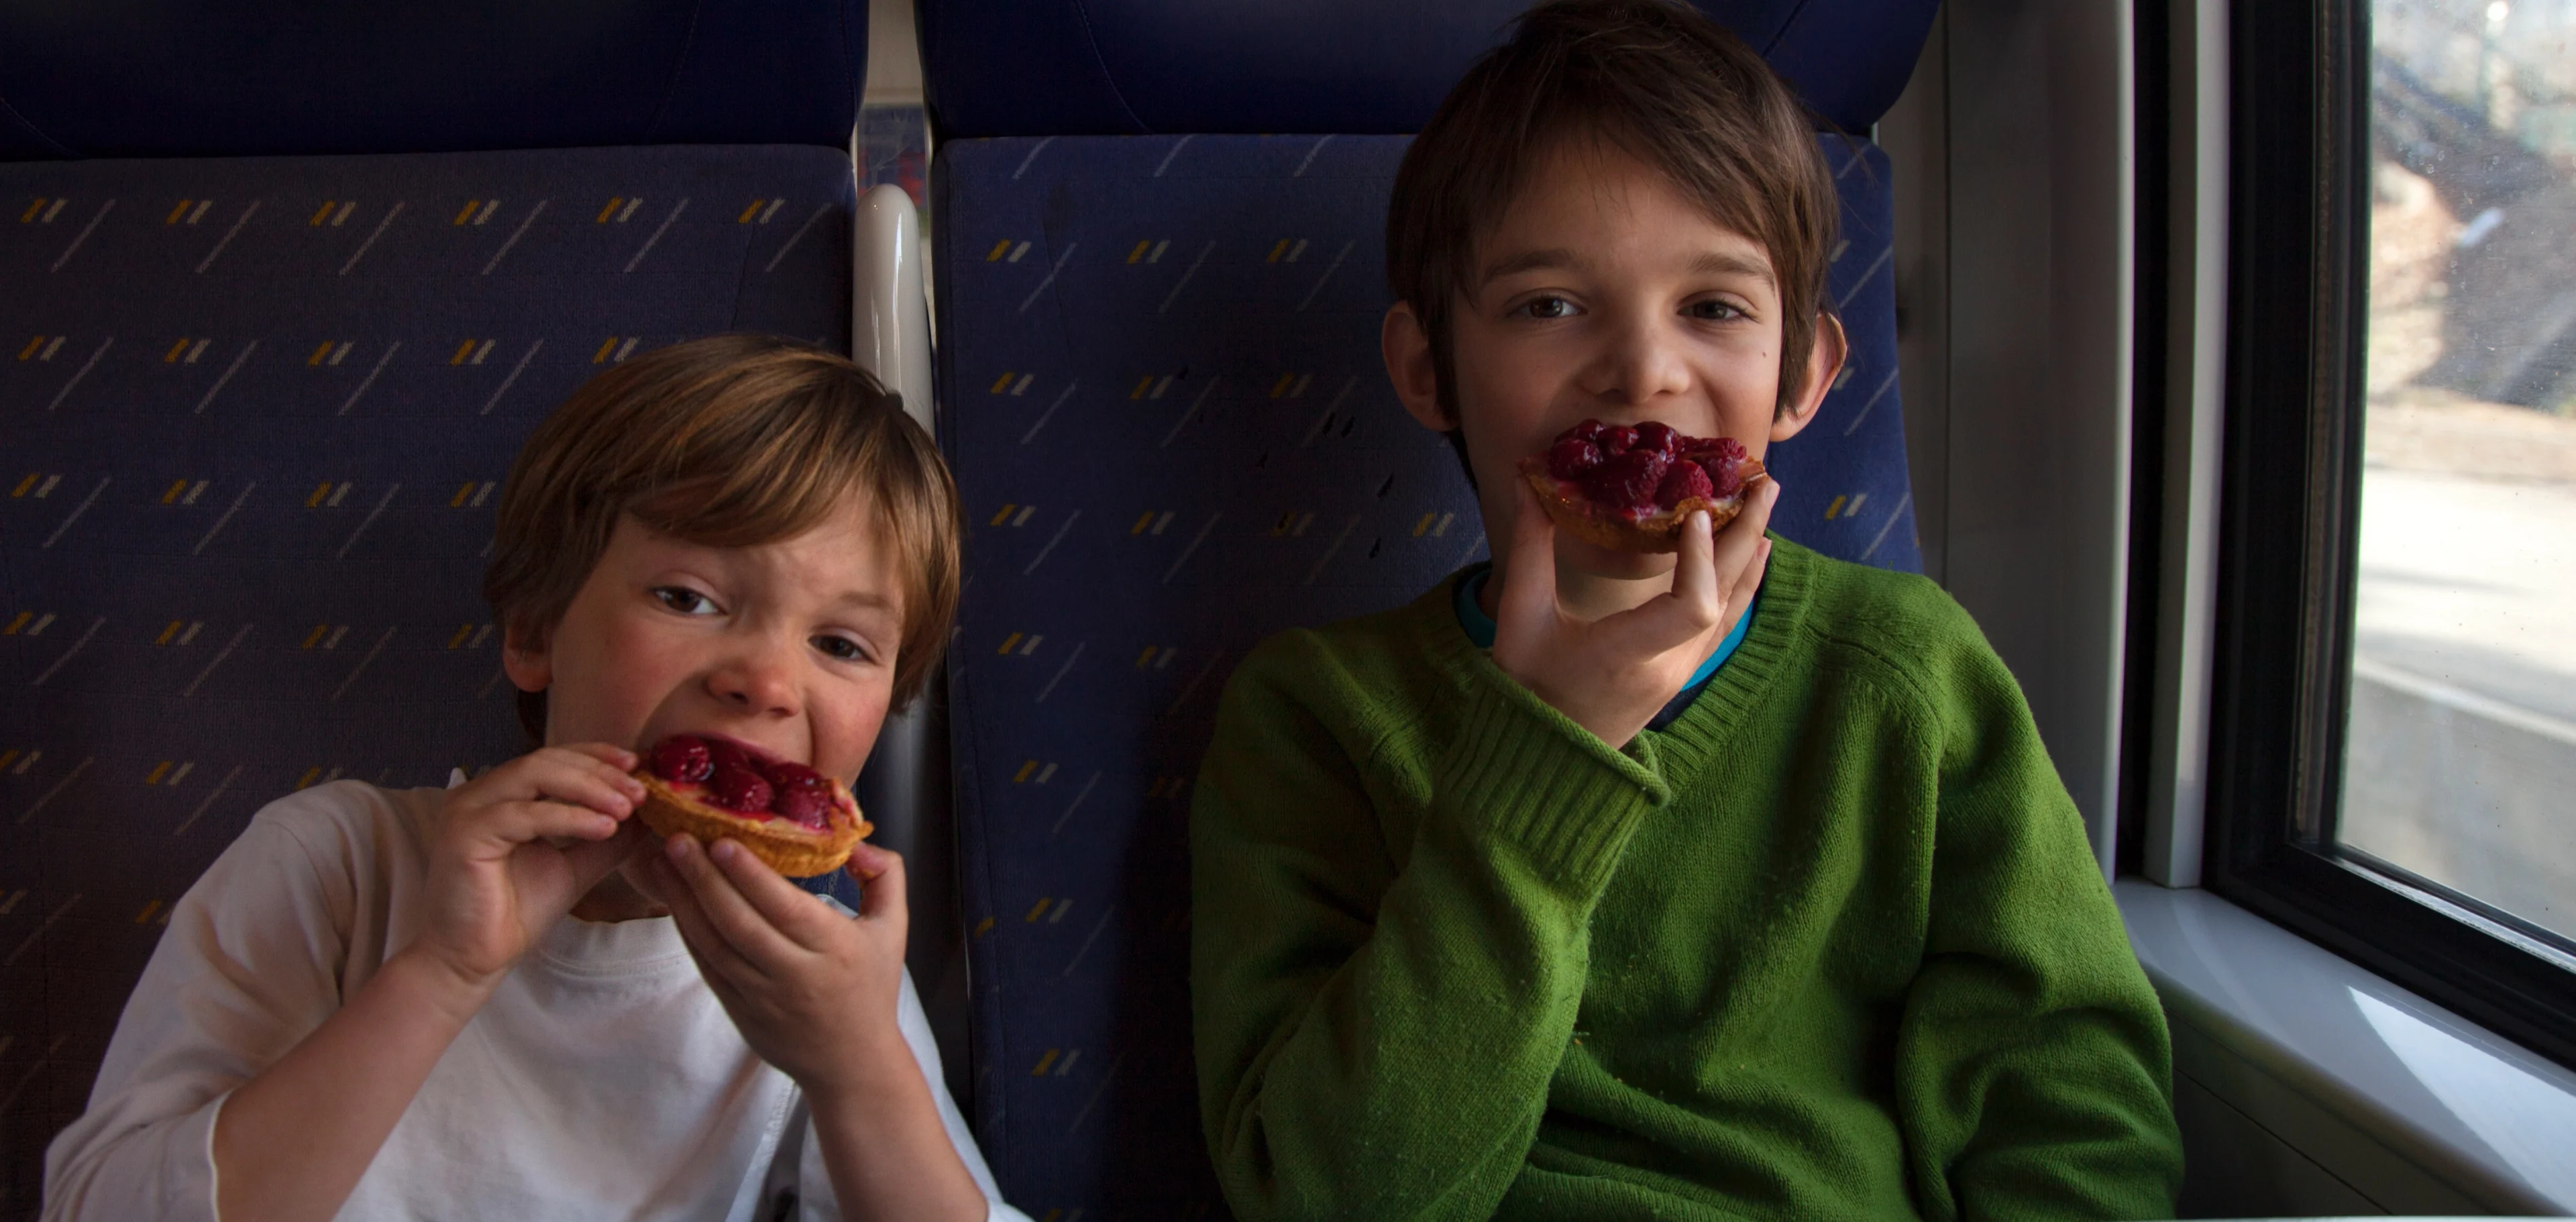 2 young boys eating large cakes while sitting at a table on a train